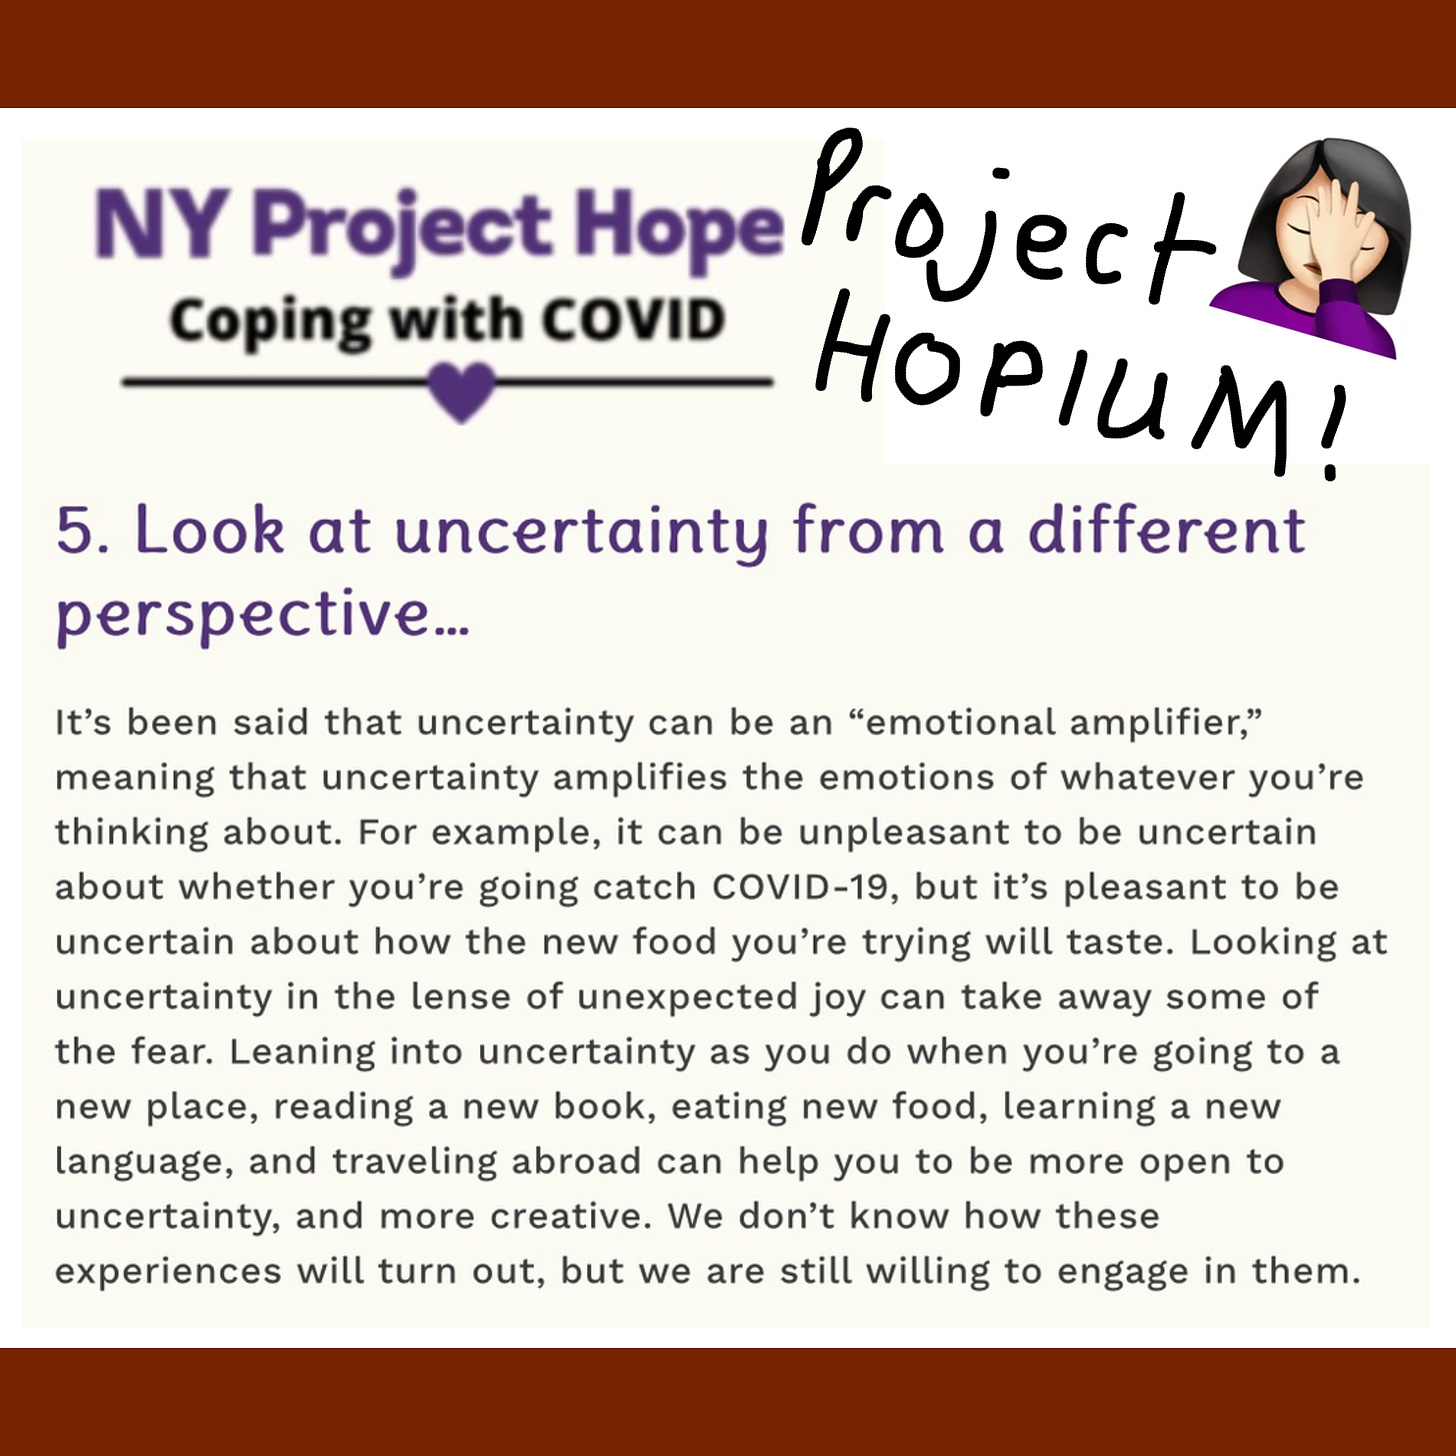 The image is from the NY Project Hope web site and written in marker are the words Project Hopium! with a facepalm emoji. Text on image reads NY Project Hope Coping with COVID 5. Look at uncertainty from a different perspective… It’s been said that uncertainty can be an “emotional amplifier,” meaning that uncertainty amplifies the emotions of whatever you’re thinking about. For example, it can be unpleasant to be uncertain about whether you’re going catch COVID-19, but it’s pleasant to be uncertain about how the new food you’re trying will taste. Looking at uncertainty in the lense of unexpected joy can take away some of the fear. Leaning into uncertainty as you do when you’re going to a new place, reading a new book, eating new food, learning a new language, and traveling abroad can help you to be more open to uncertainty, and more creative. We don’t know how these experiences will turn out, but we are still willing to engage in them.